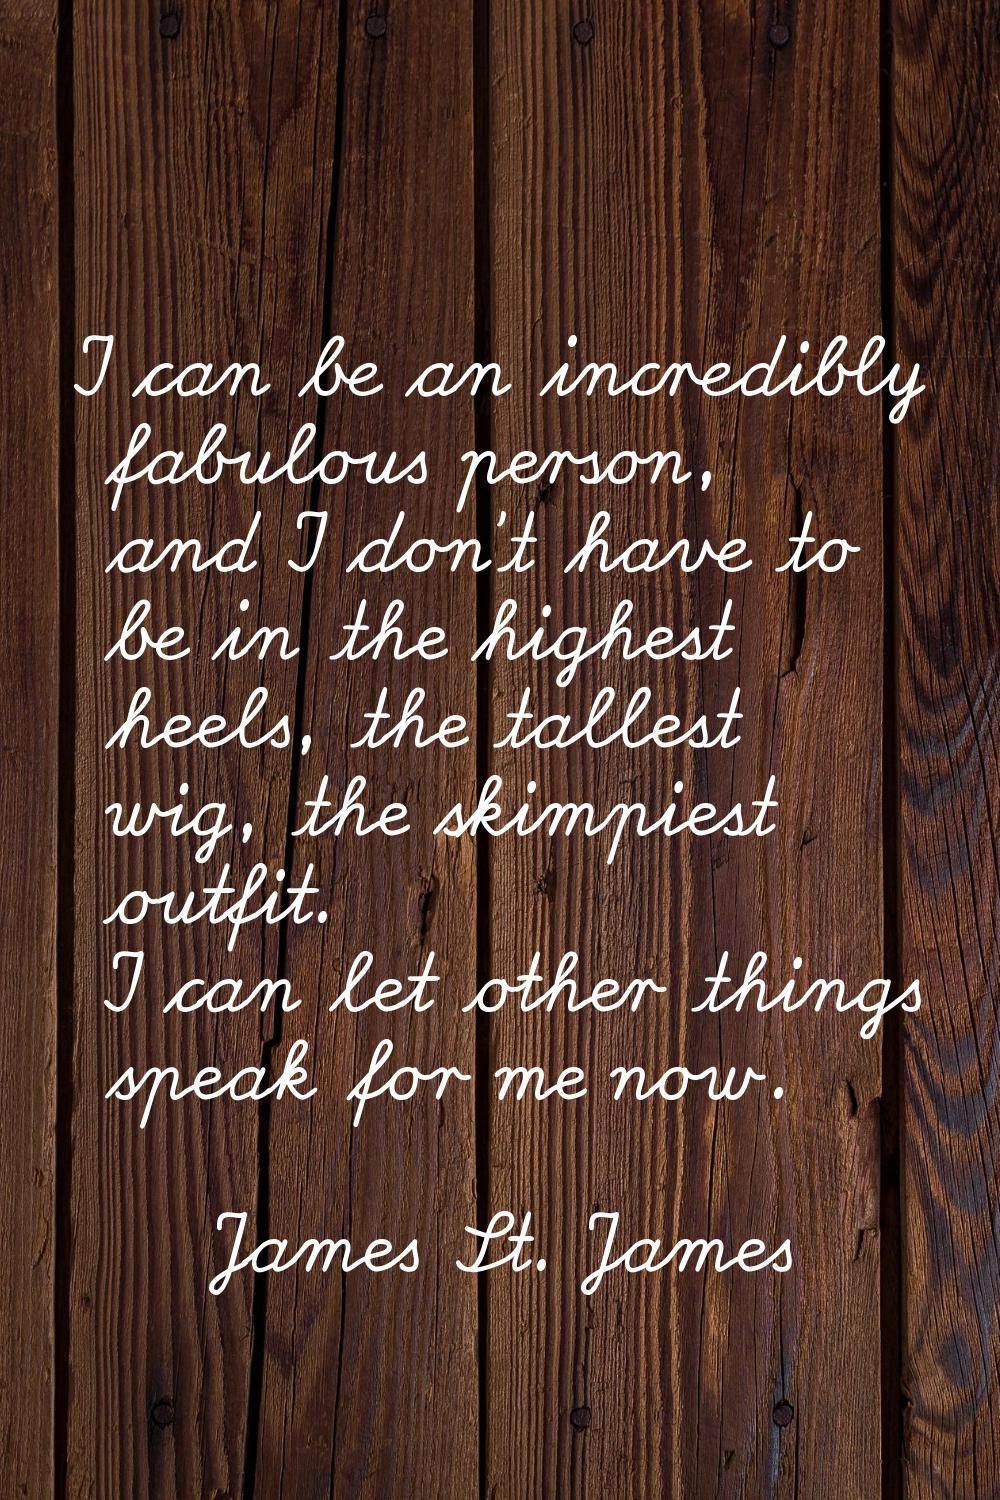 I can be an incredibly fabulous person, and I don't have to be in the highest heels, the tallest wi